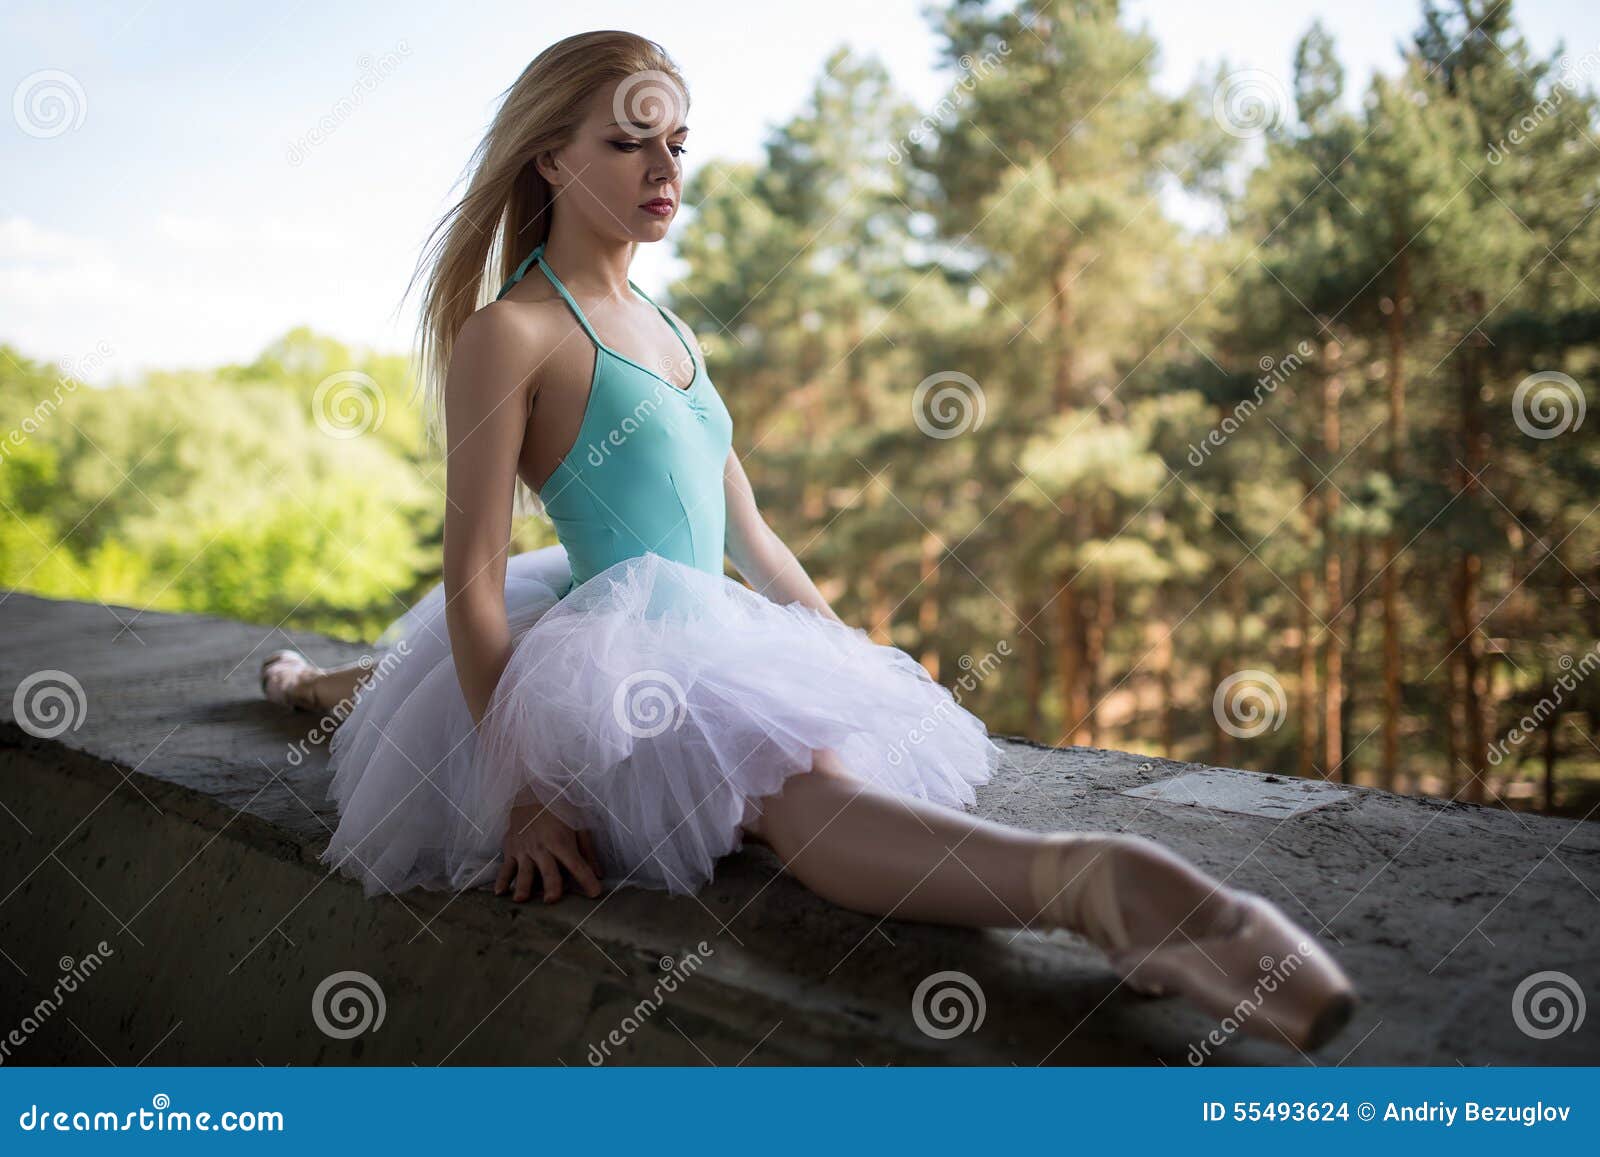 Premium Photo  Young graceful ballet dancer in white tutu and tights  standing on tiptoe